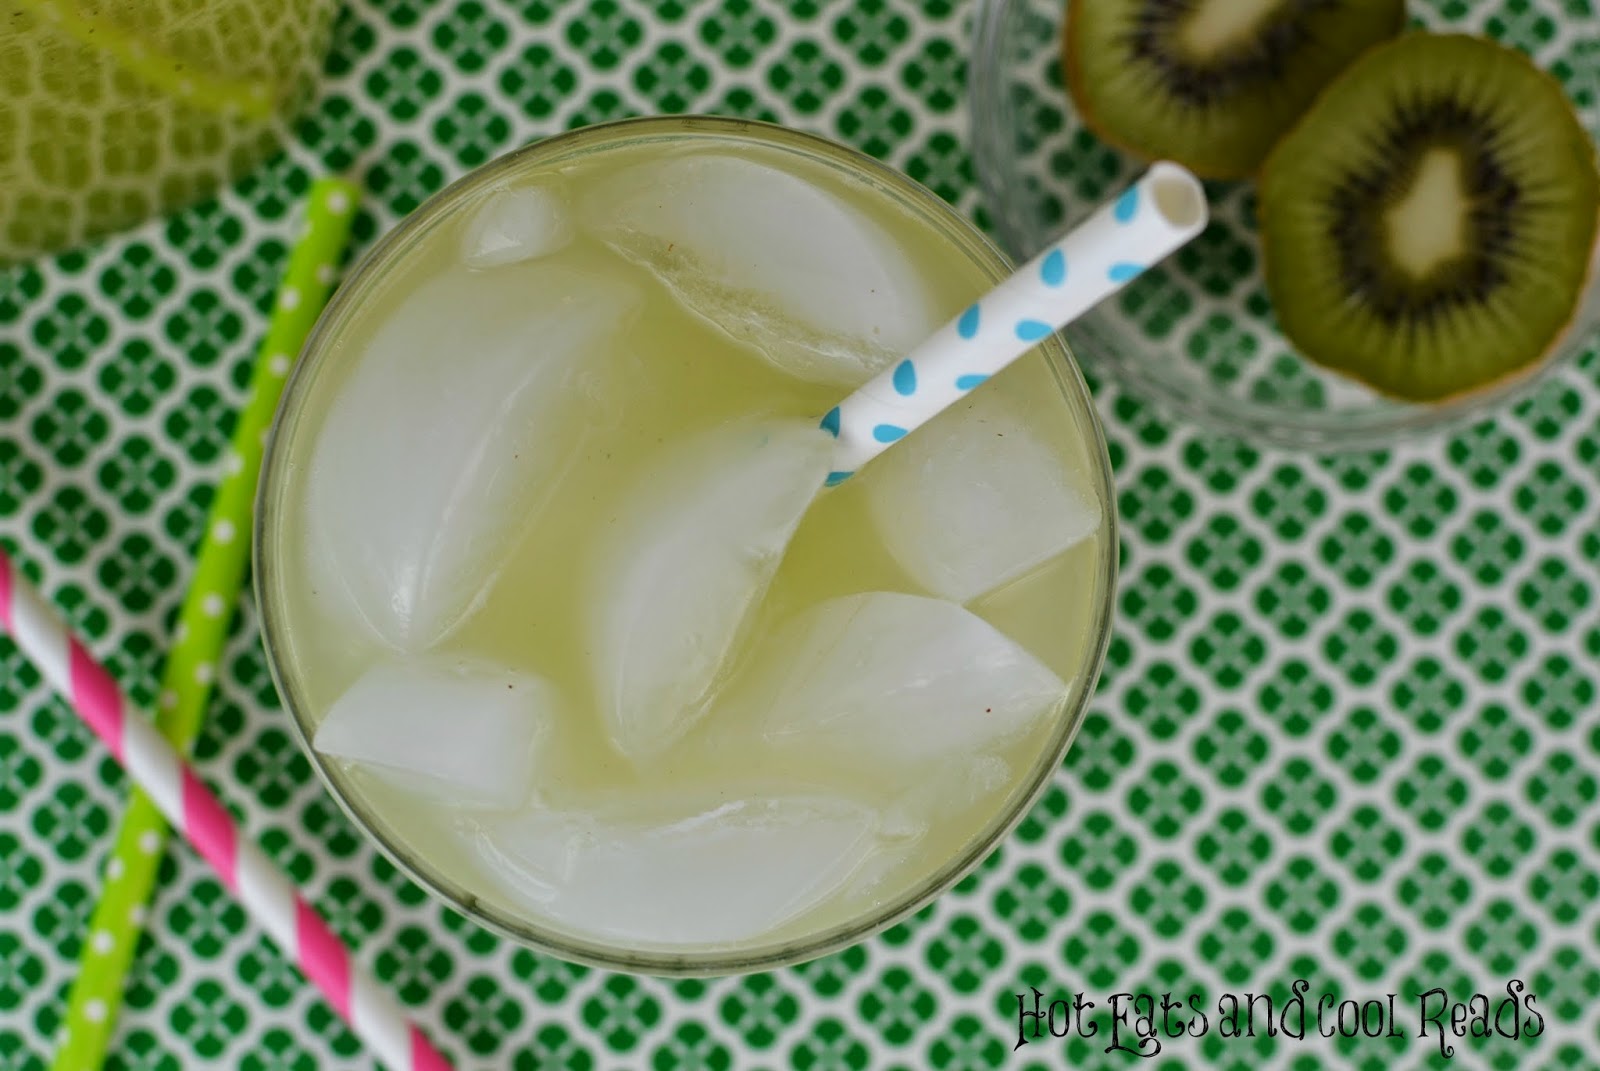 Refreshing drink for a warm, sunny day! Add your favorite liquor for an adult beverage! Kiwi Lemonade from Hot Eats and Cool Reads! 